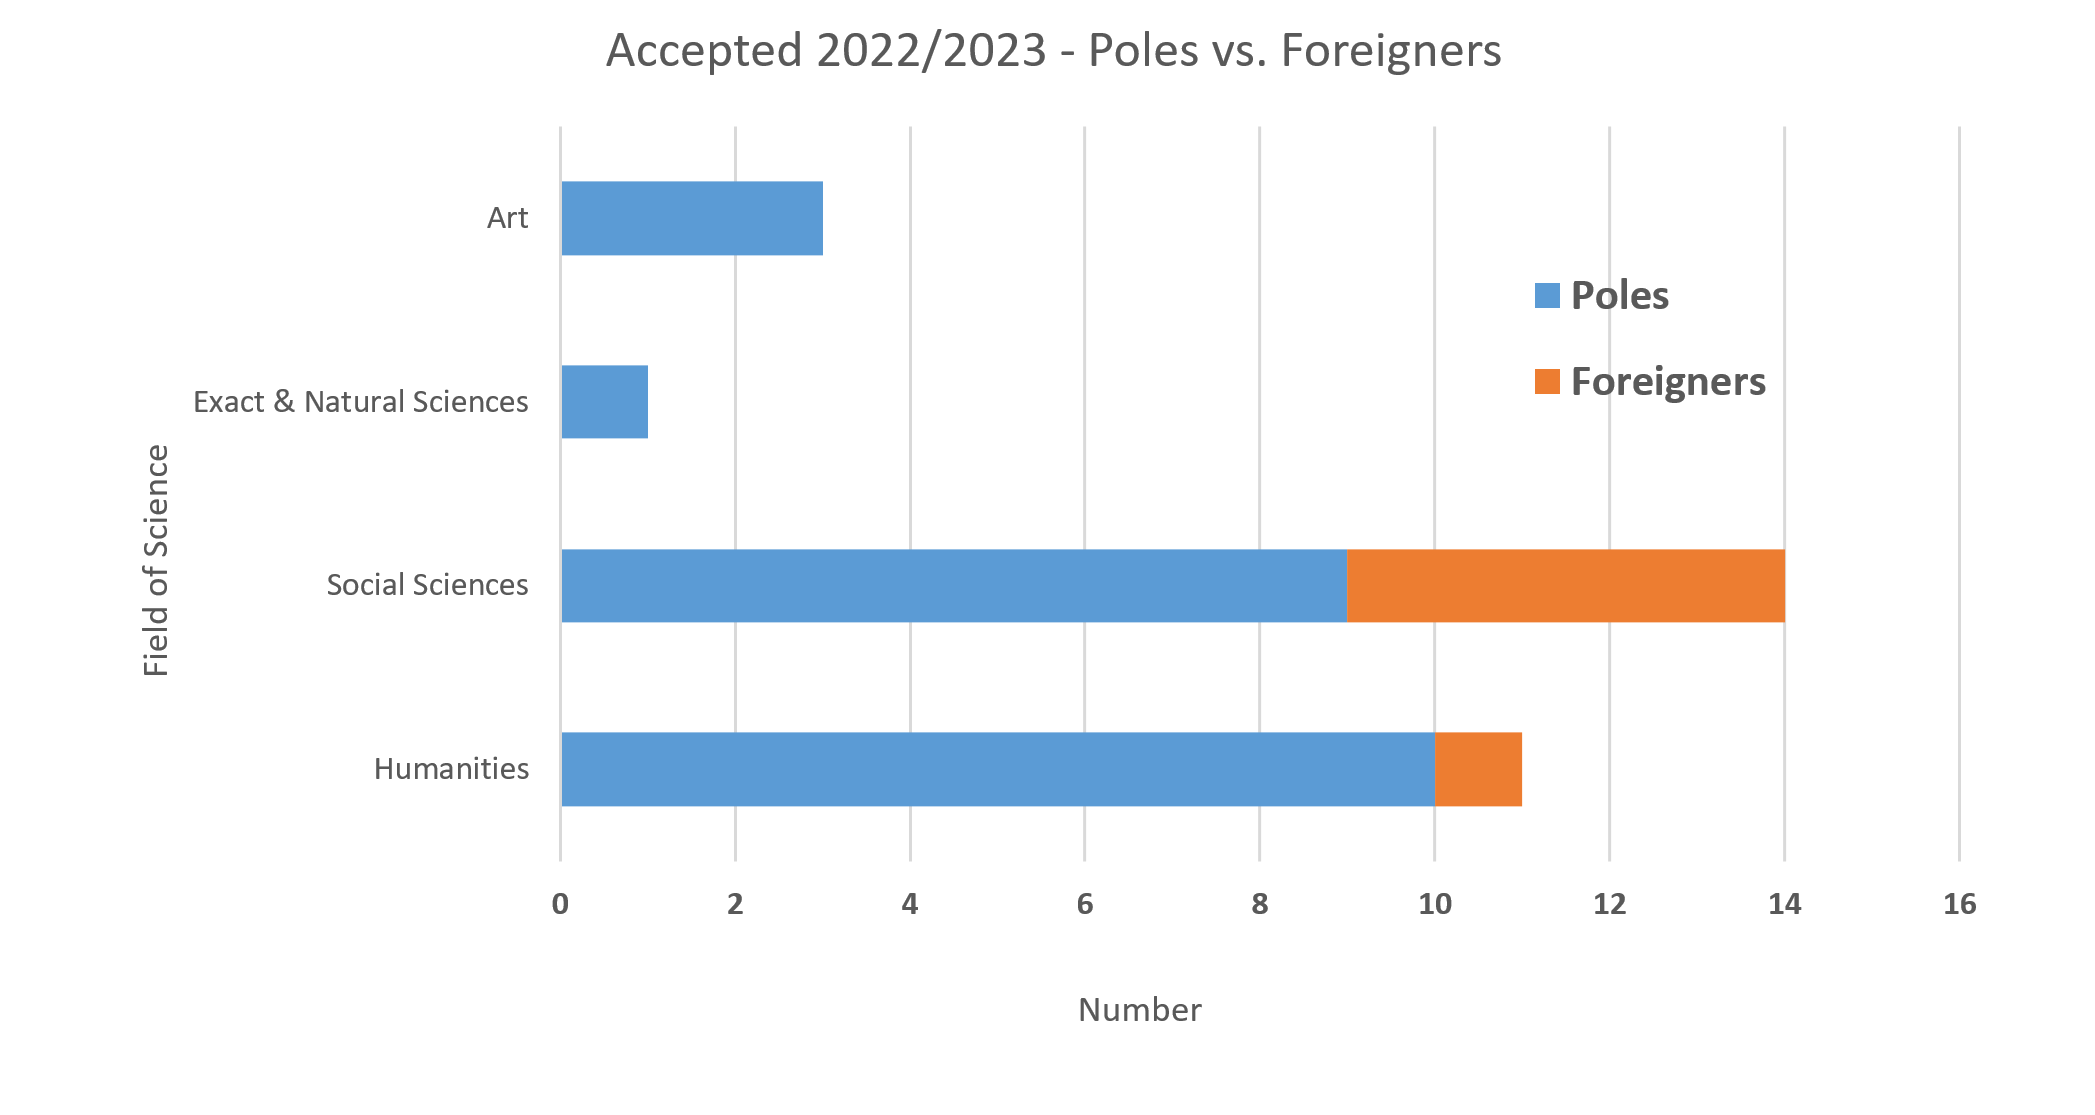 Accepted Poles vs foreigners